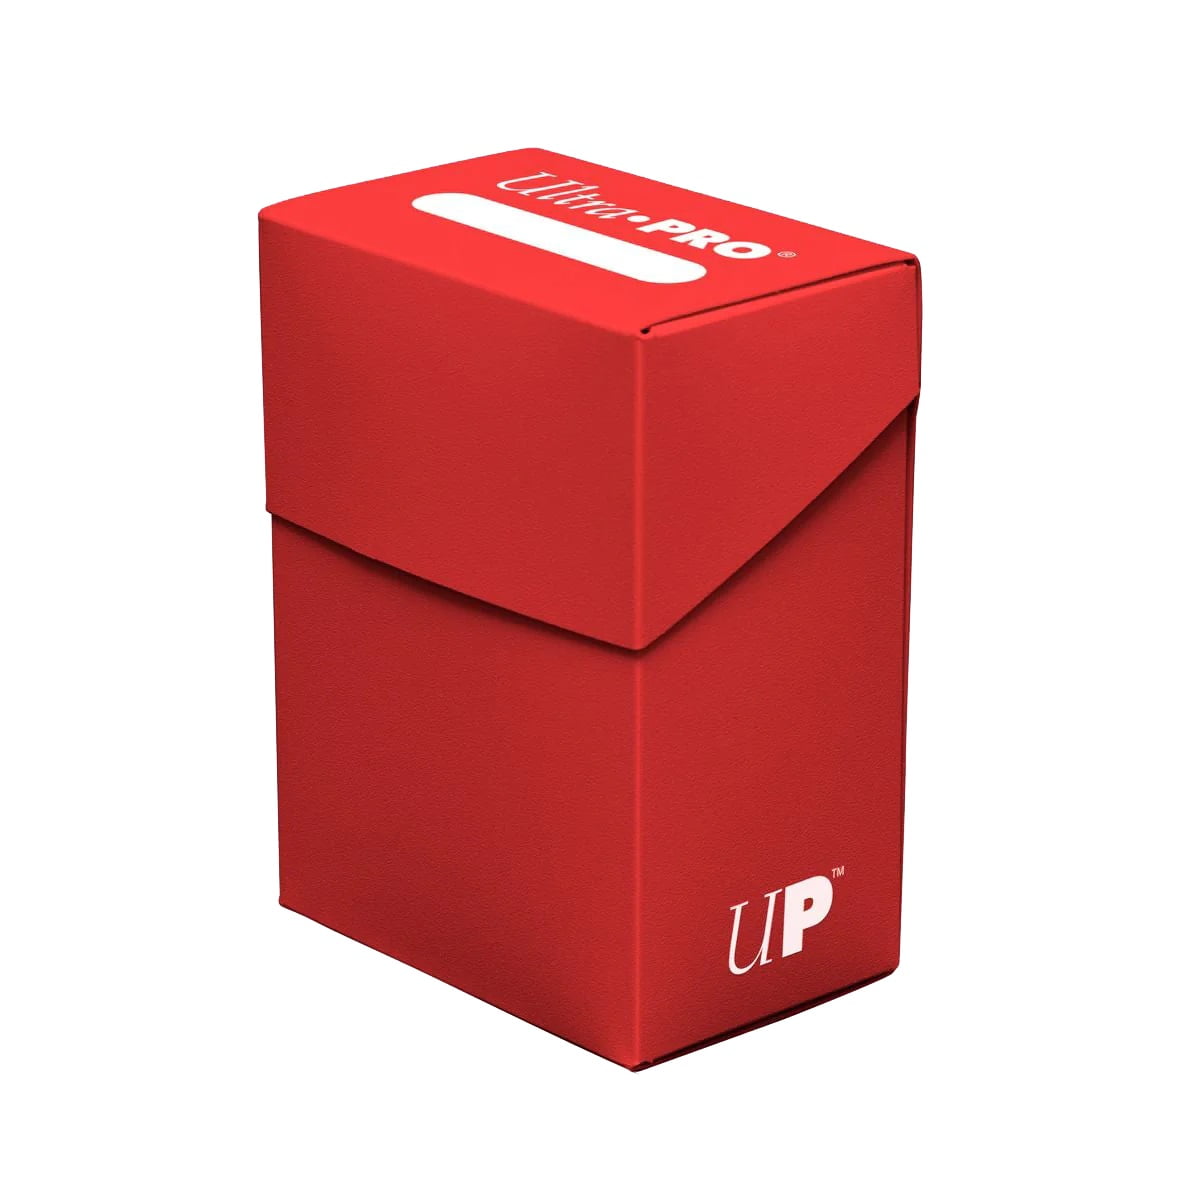 Ulp85298 Deck Box, Solid Red